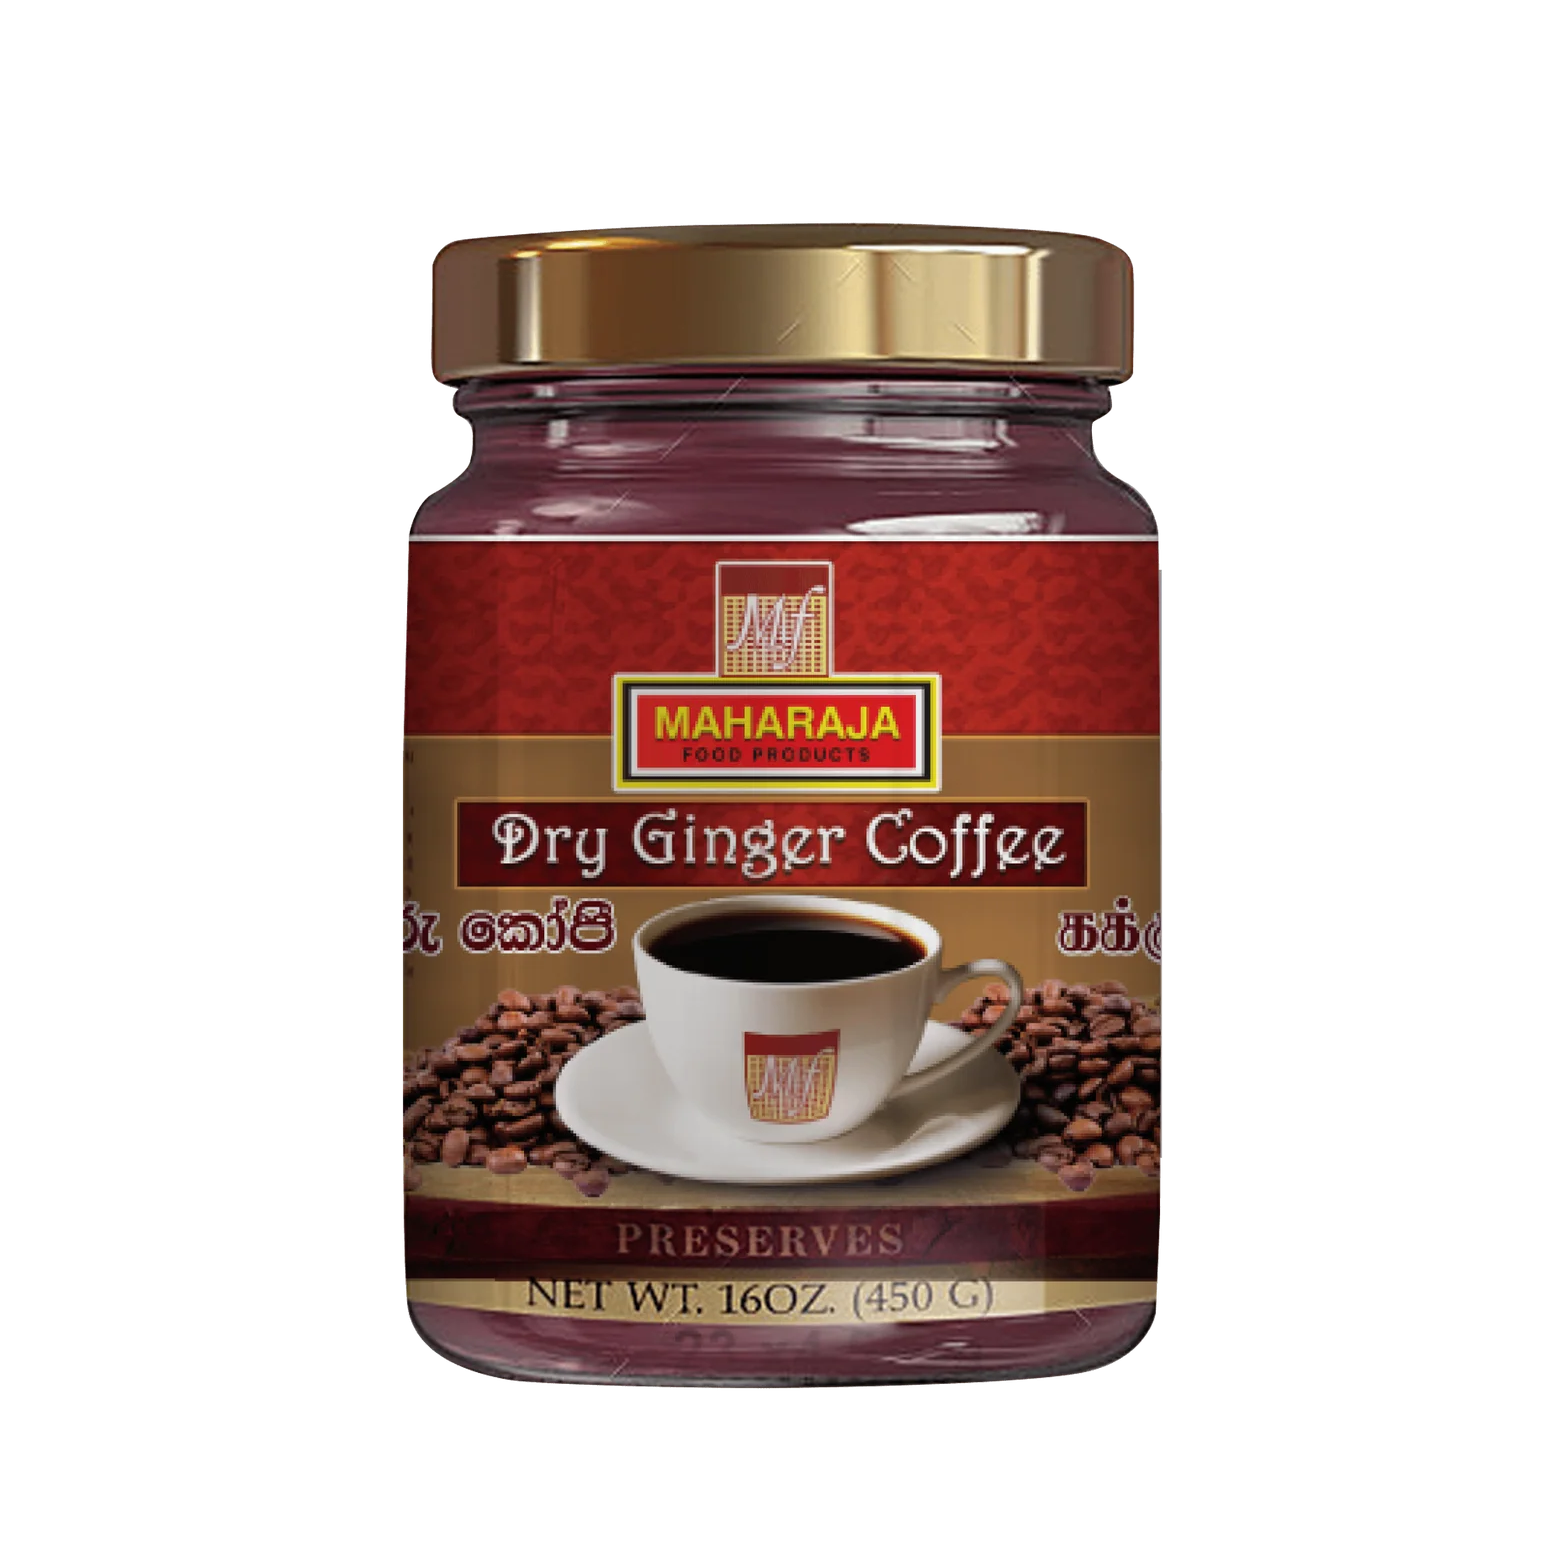 Dry ginger spicy coffee